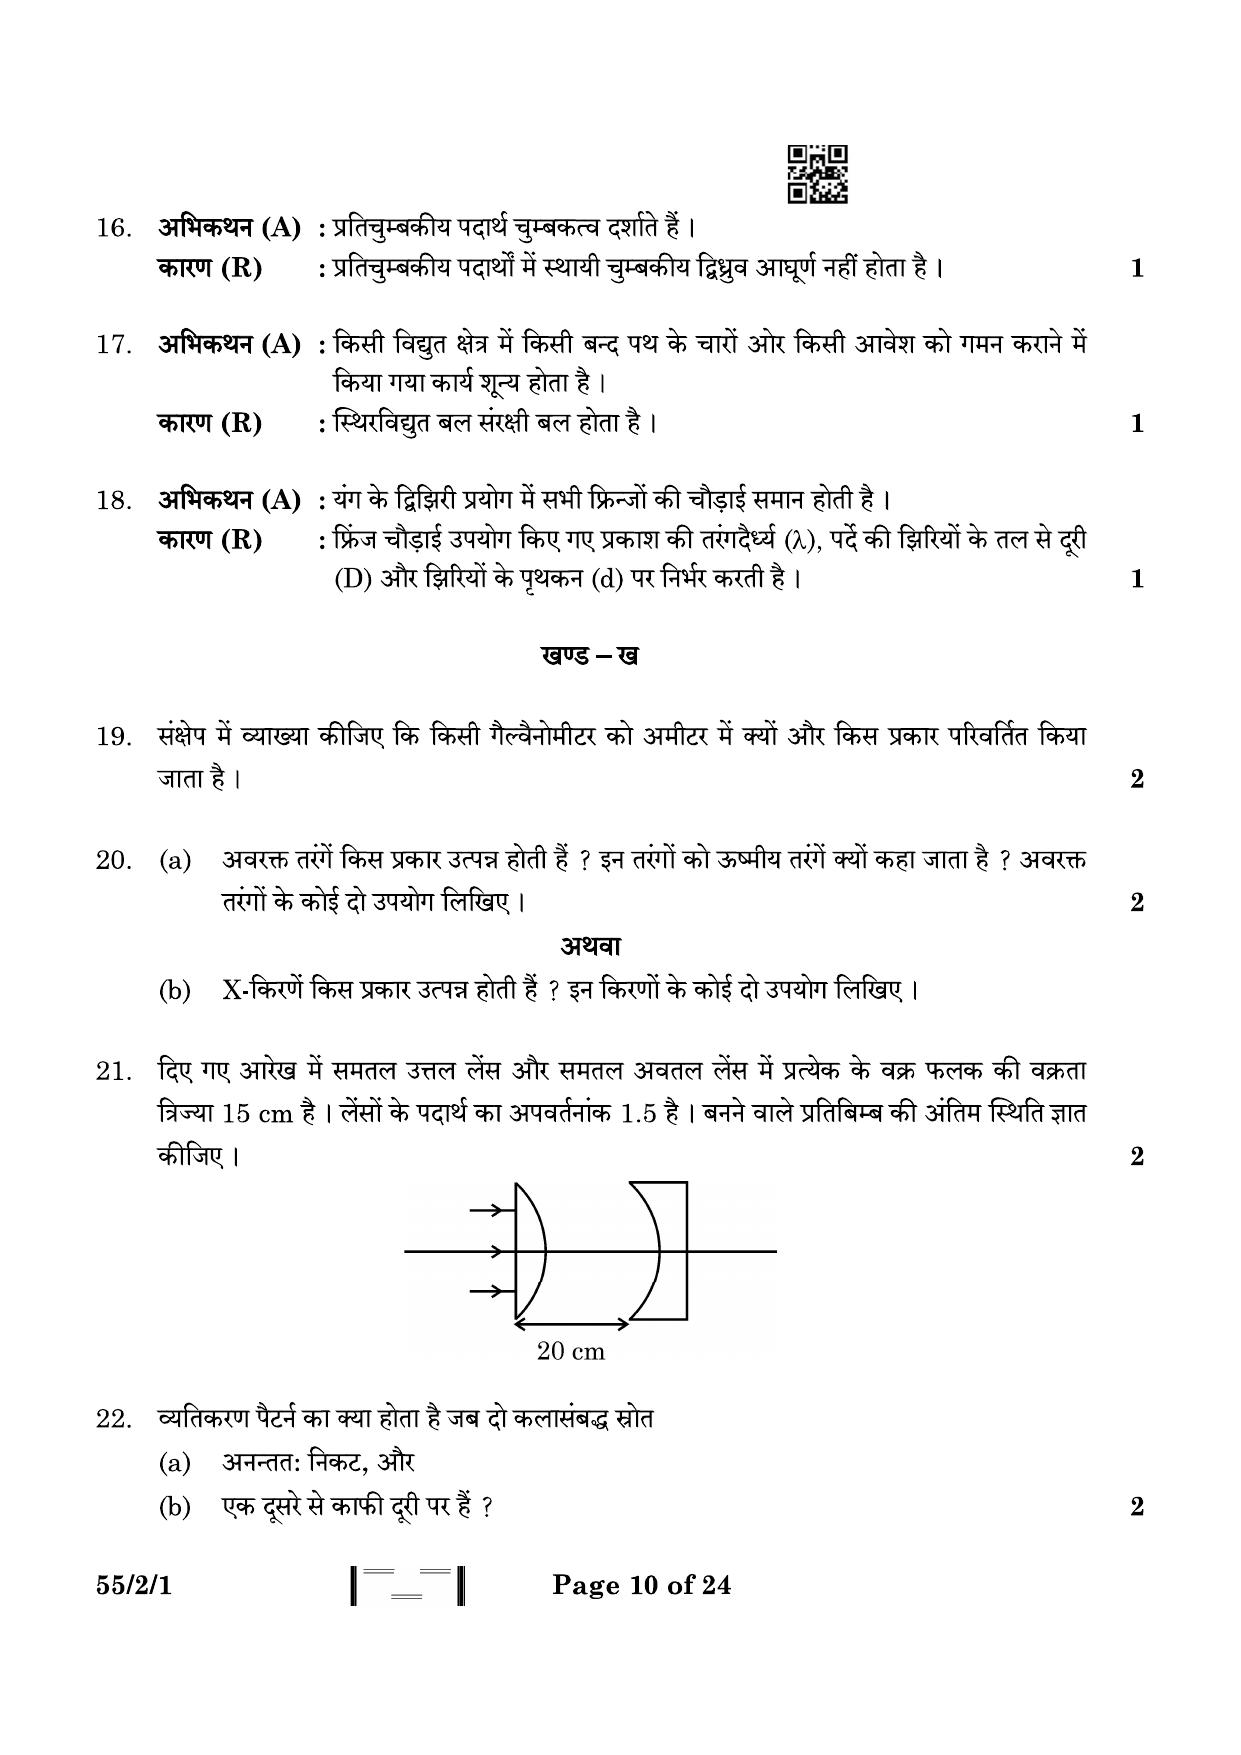 CBSE Class 12 55-2-1 Physics 2023 Question Paper - Page 10